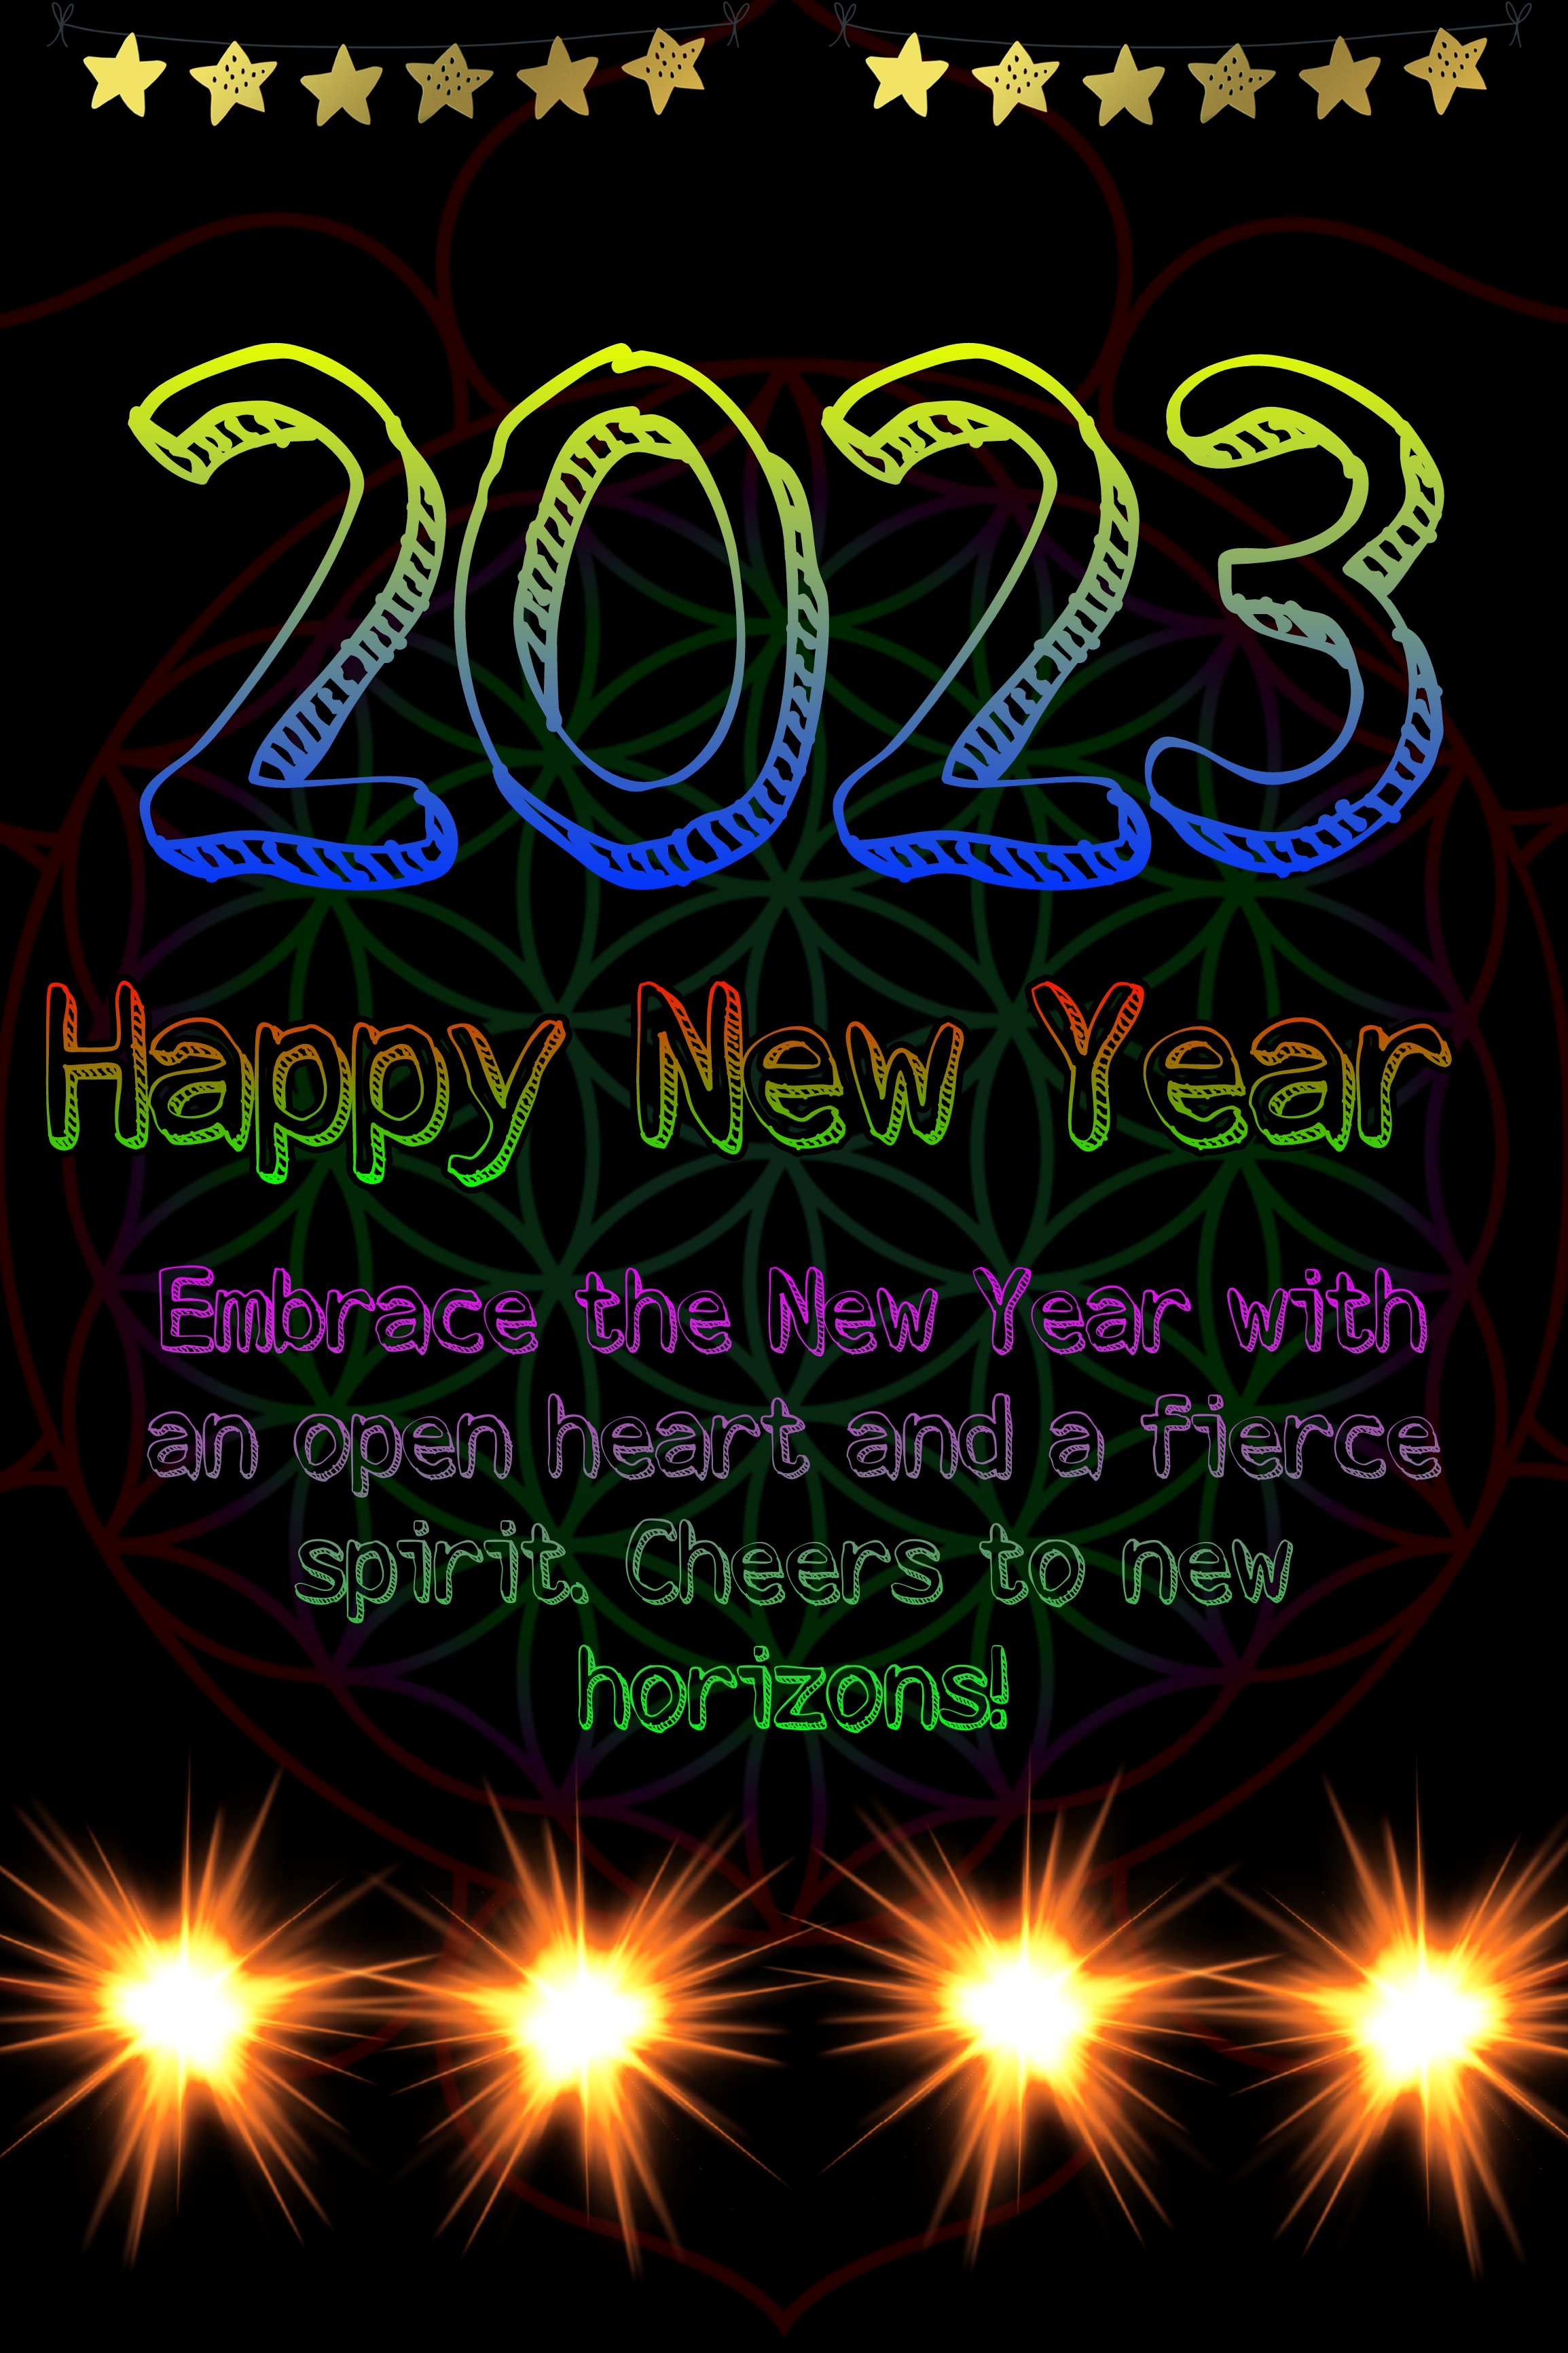 Happy New Year 2023 wishes images